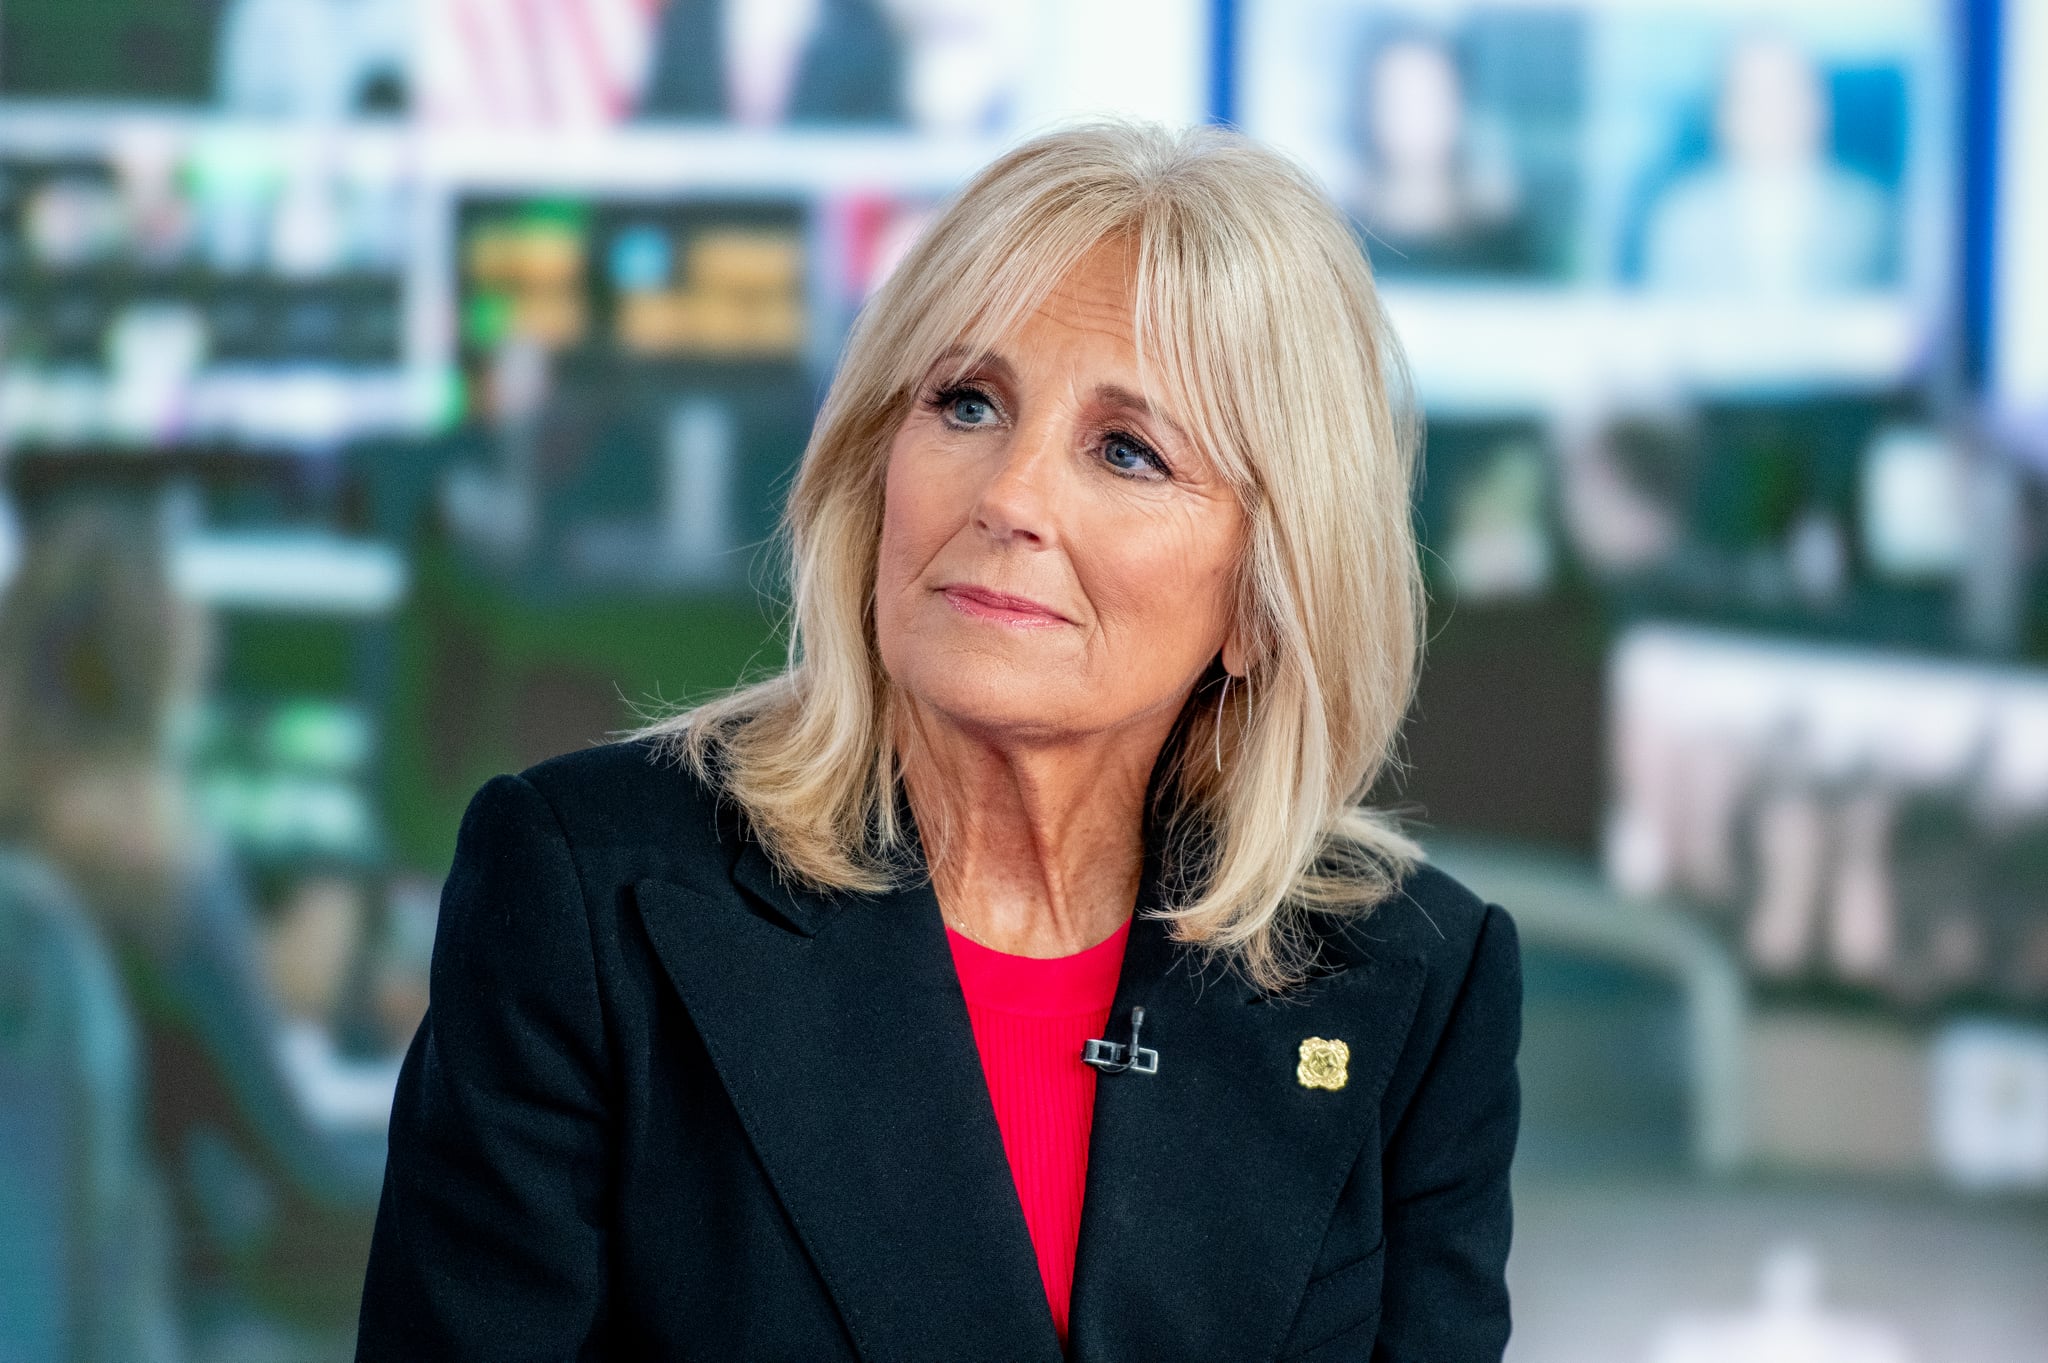 Jill Biden Was the Second Lady of the U.S. but She's Also an Educator